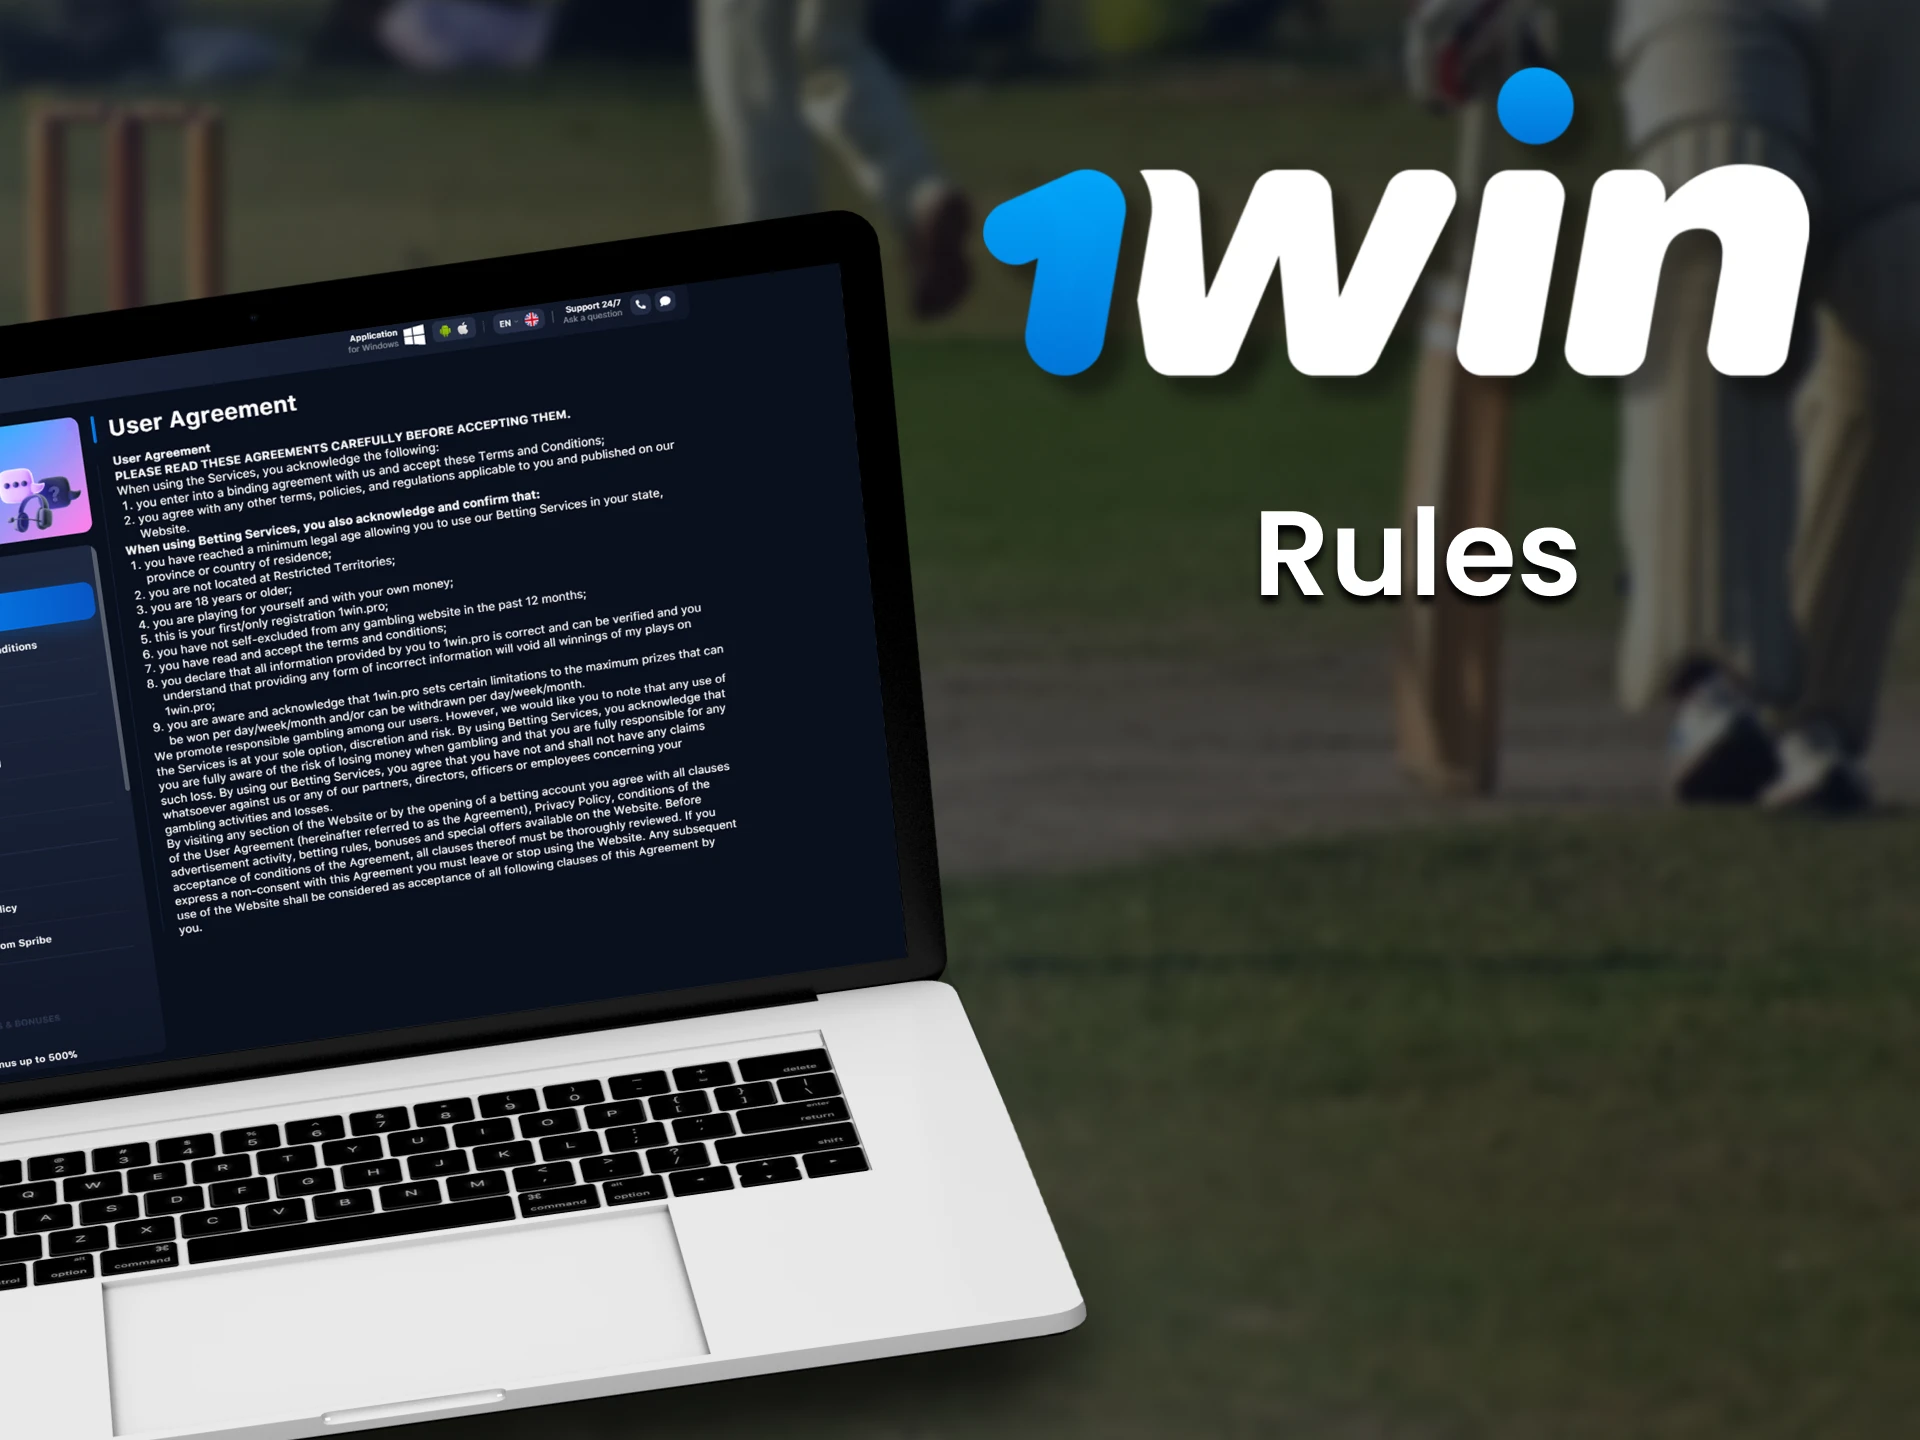 Every user from India must follow the rules to bet with 1win.